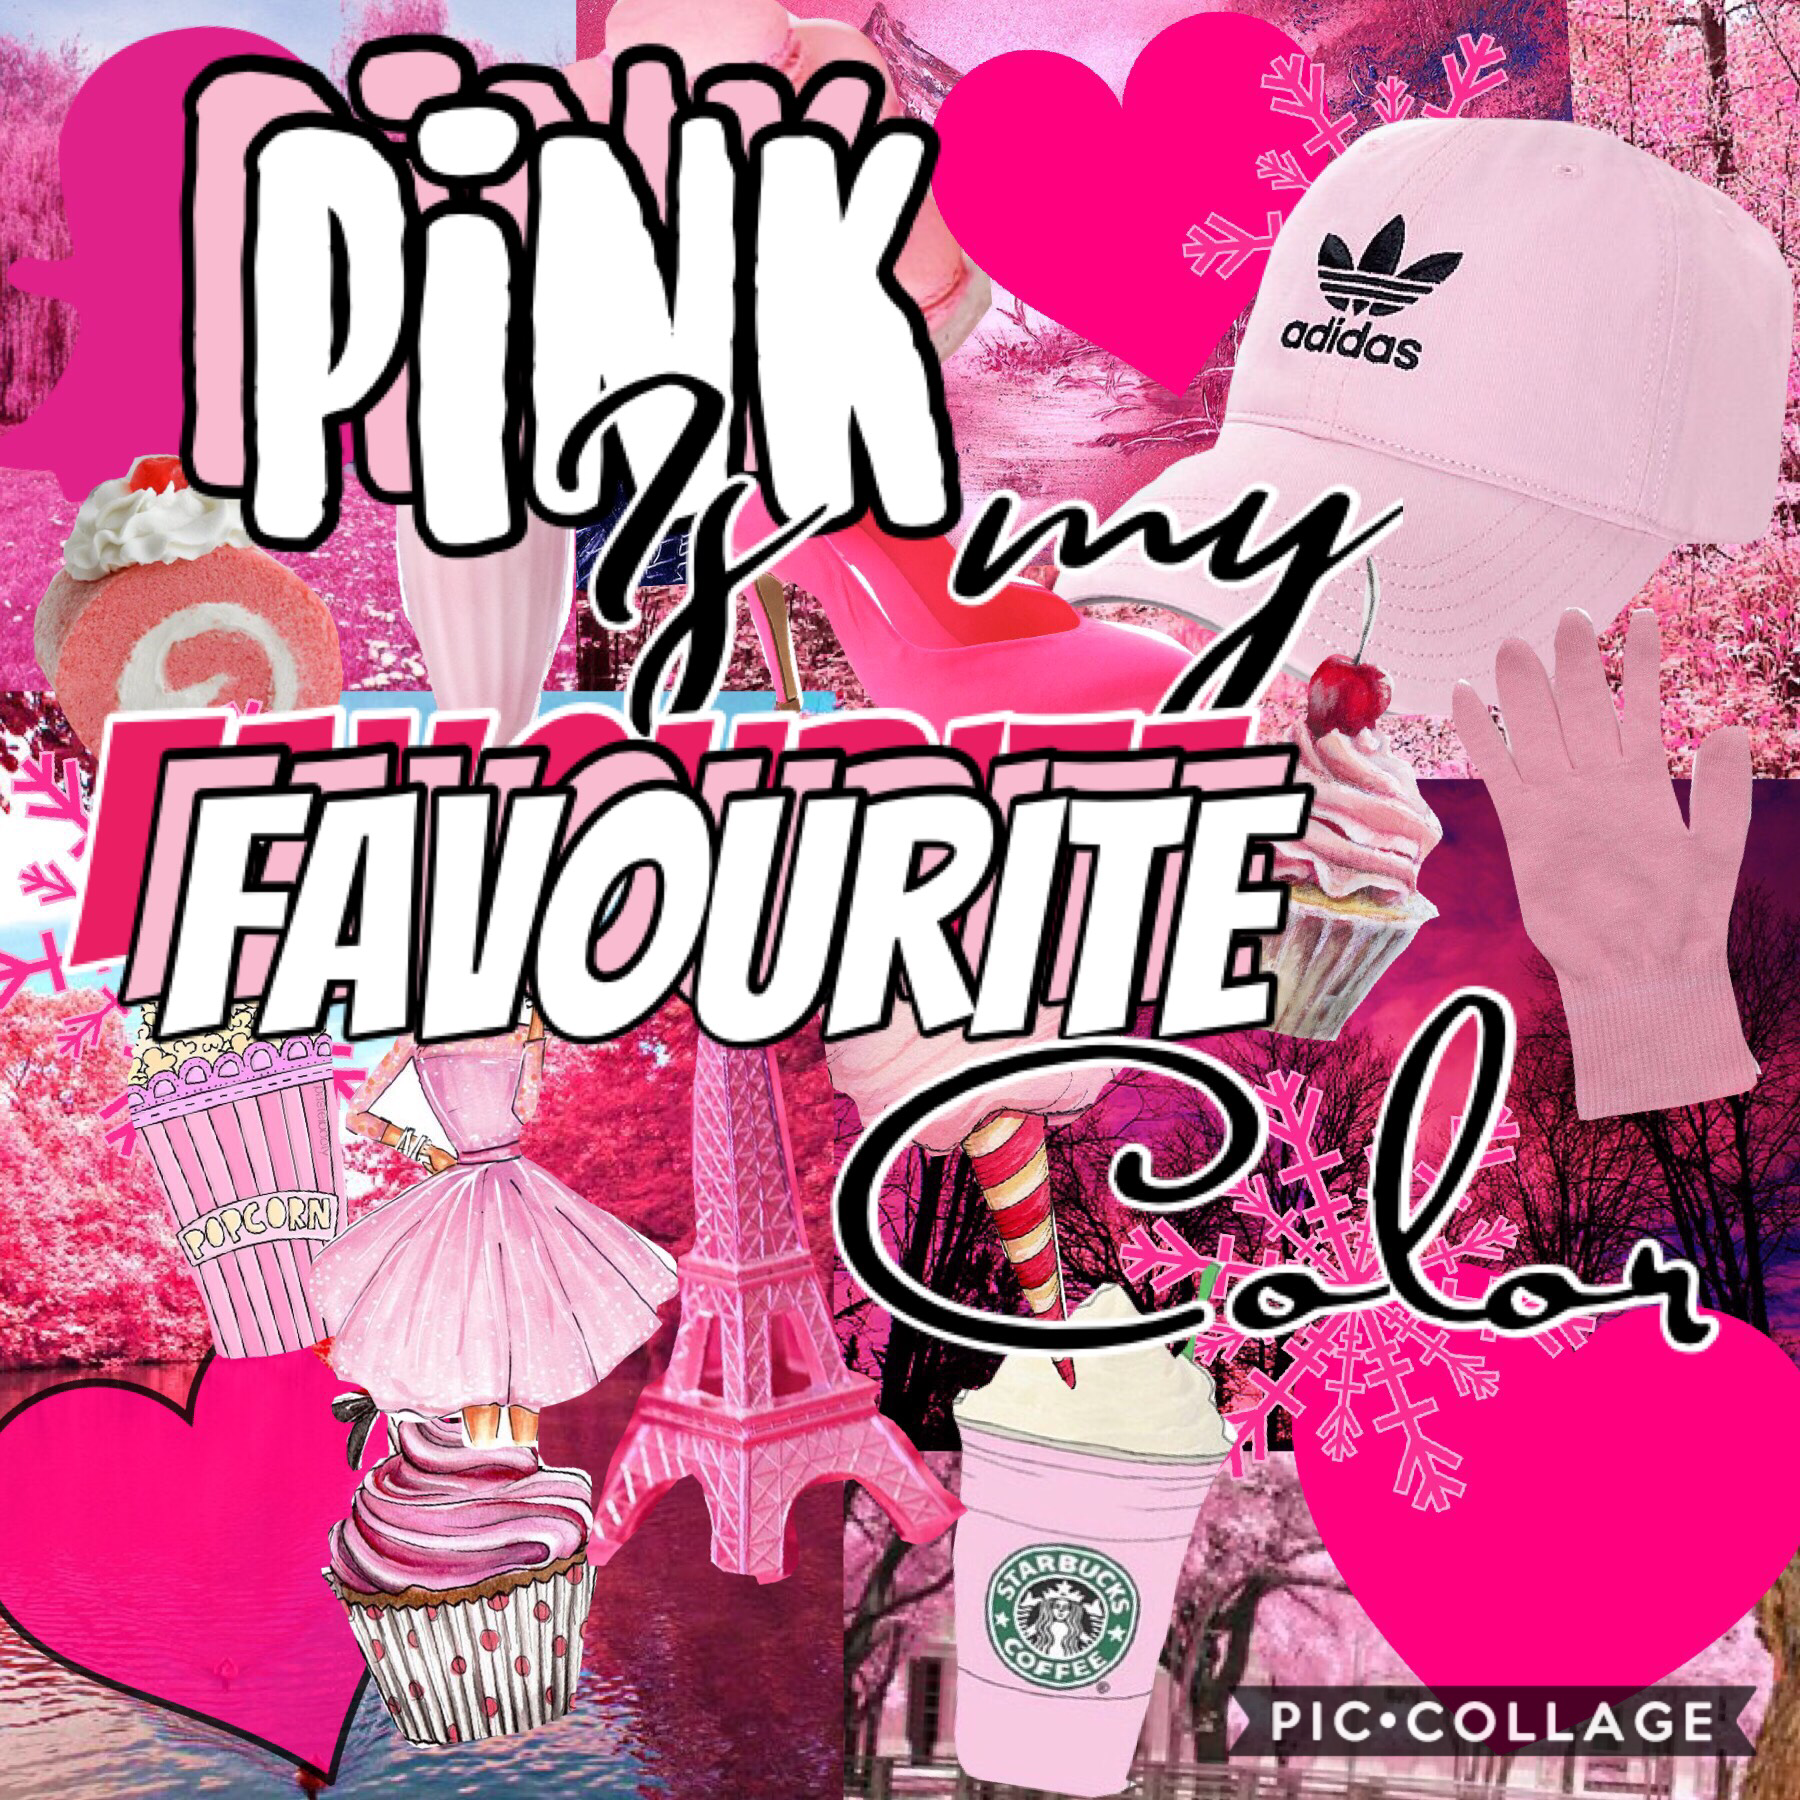 Tap if you are AMAZING! (Everyone should tap)
Hello my beautiful kitty’s! Hope you are having an amazing day!🥳
I have to go out with my dad to meet up with one of his friends😩 
Ugh it’s going to be SO boring! 😑 
QOTD: What’s your favourite color?
AOTD: Pa